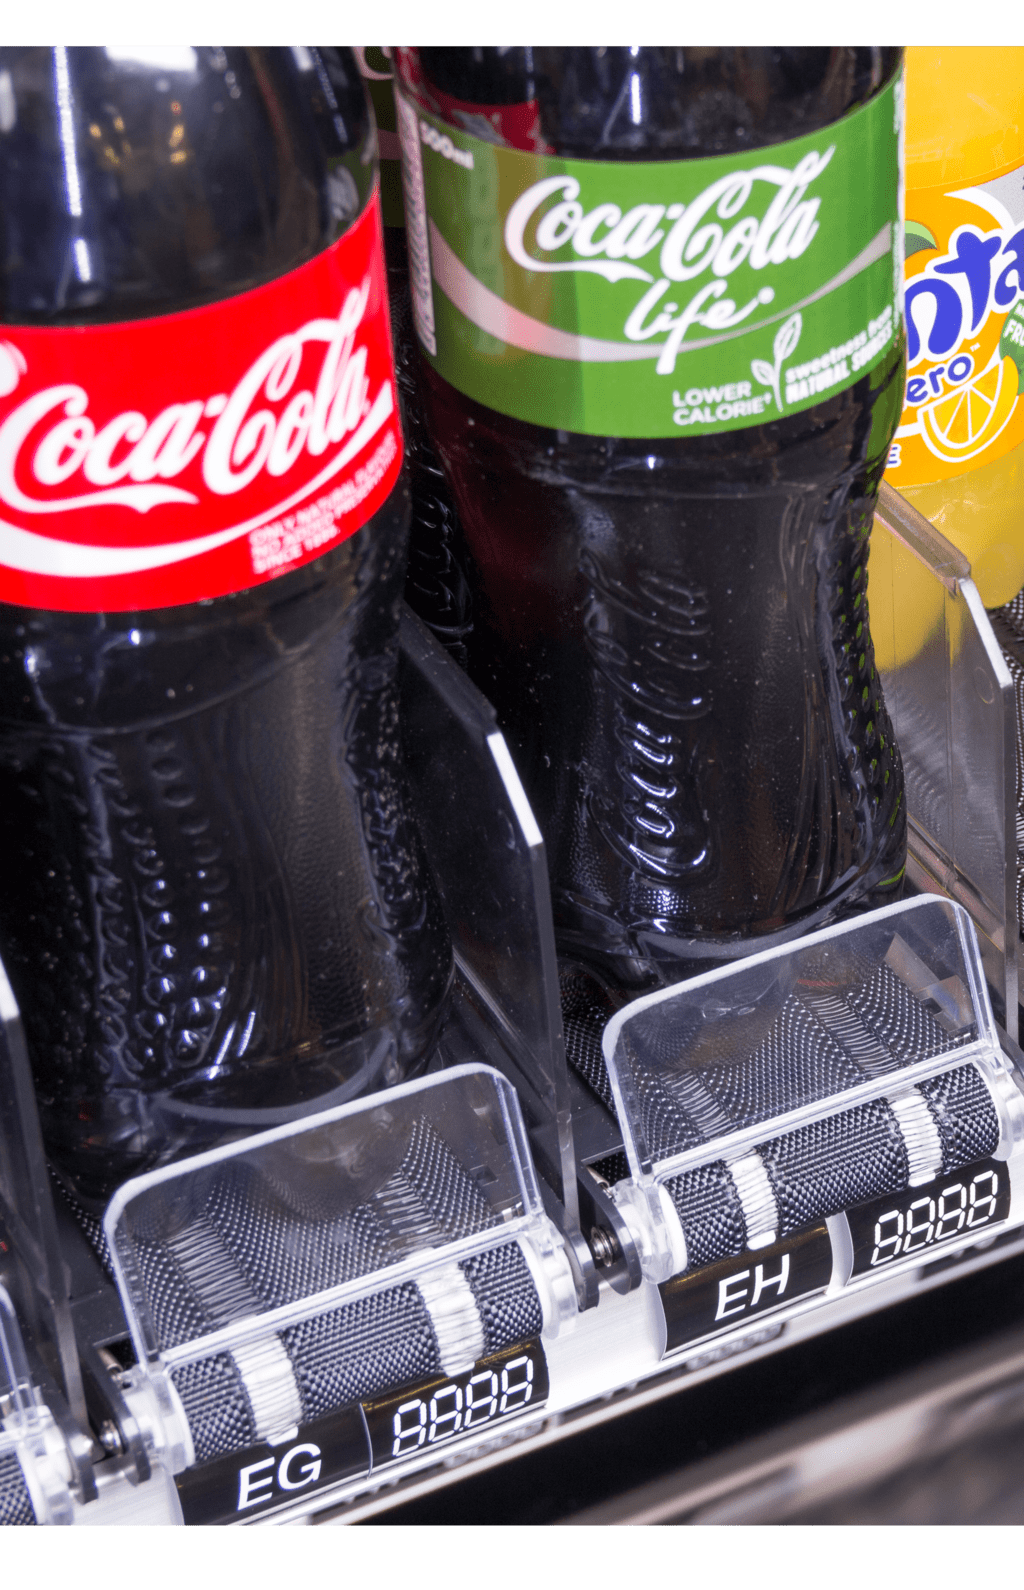 Installers Of Drinks Vending Machines For Colleges